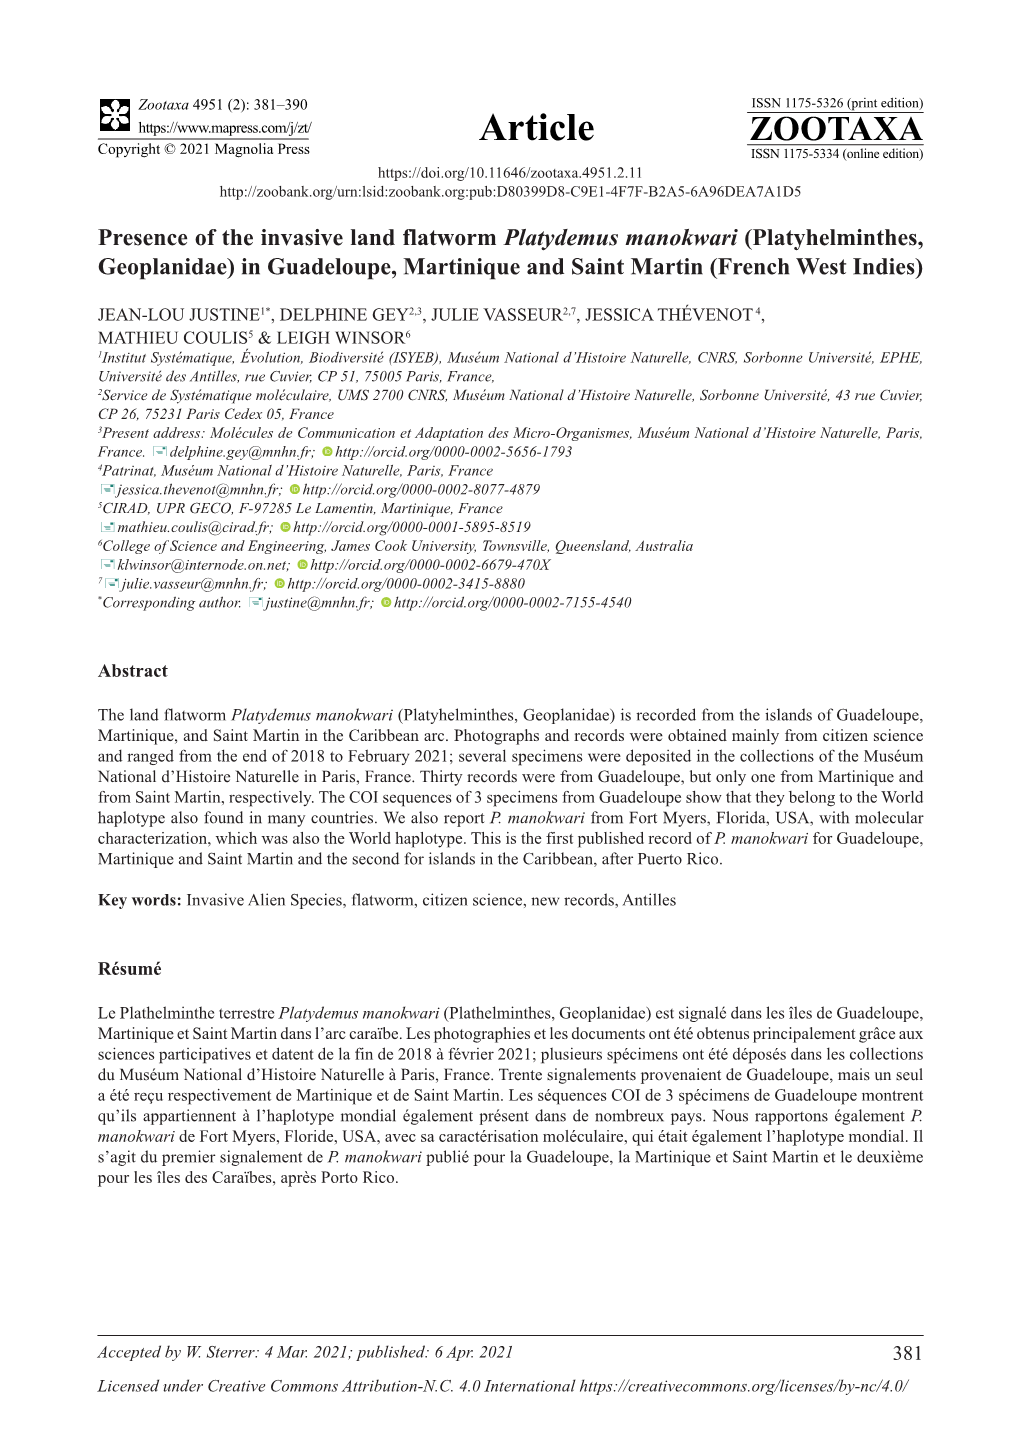 Presence of the Invasive Land Flatworm Platydemus Manokwari (Platyhelminthes, Geoplanidae) in Guadeloupe, Martinique and Saint Martin (French West Indies)